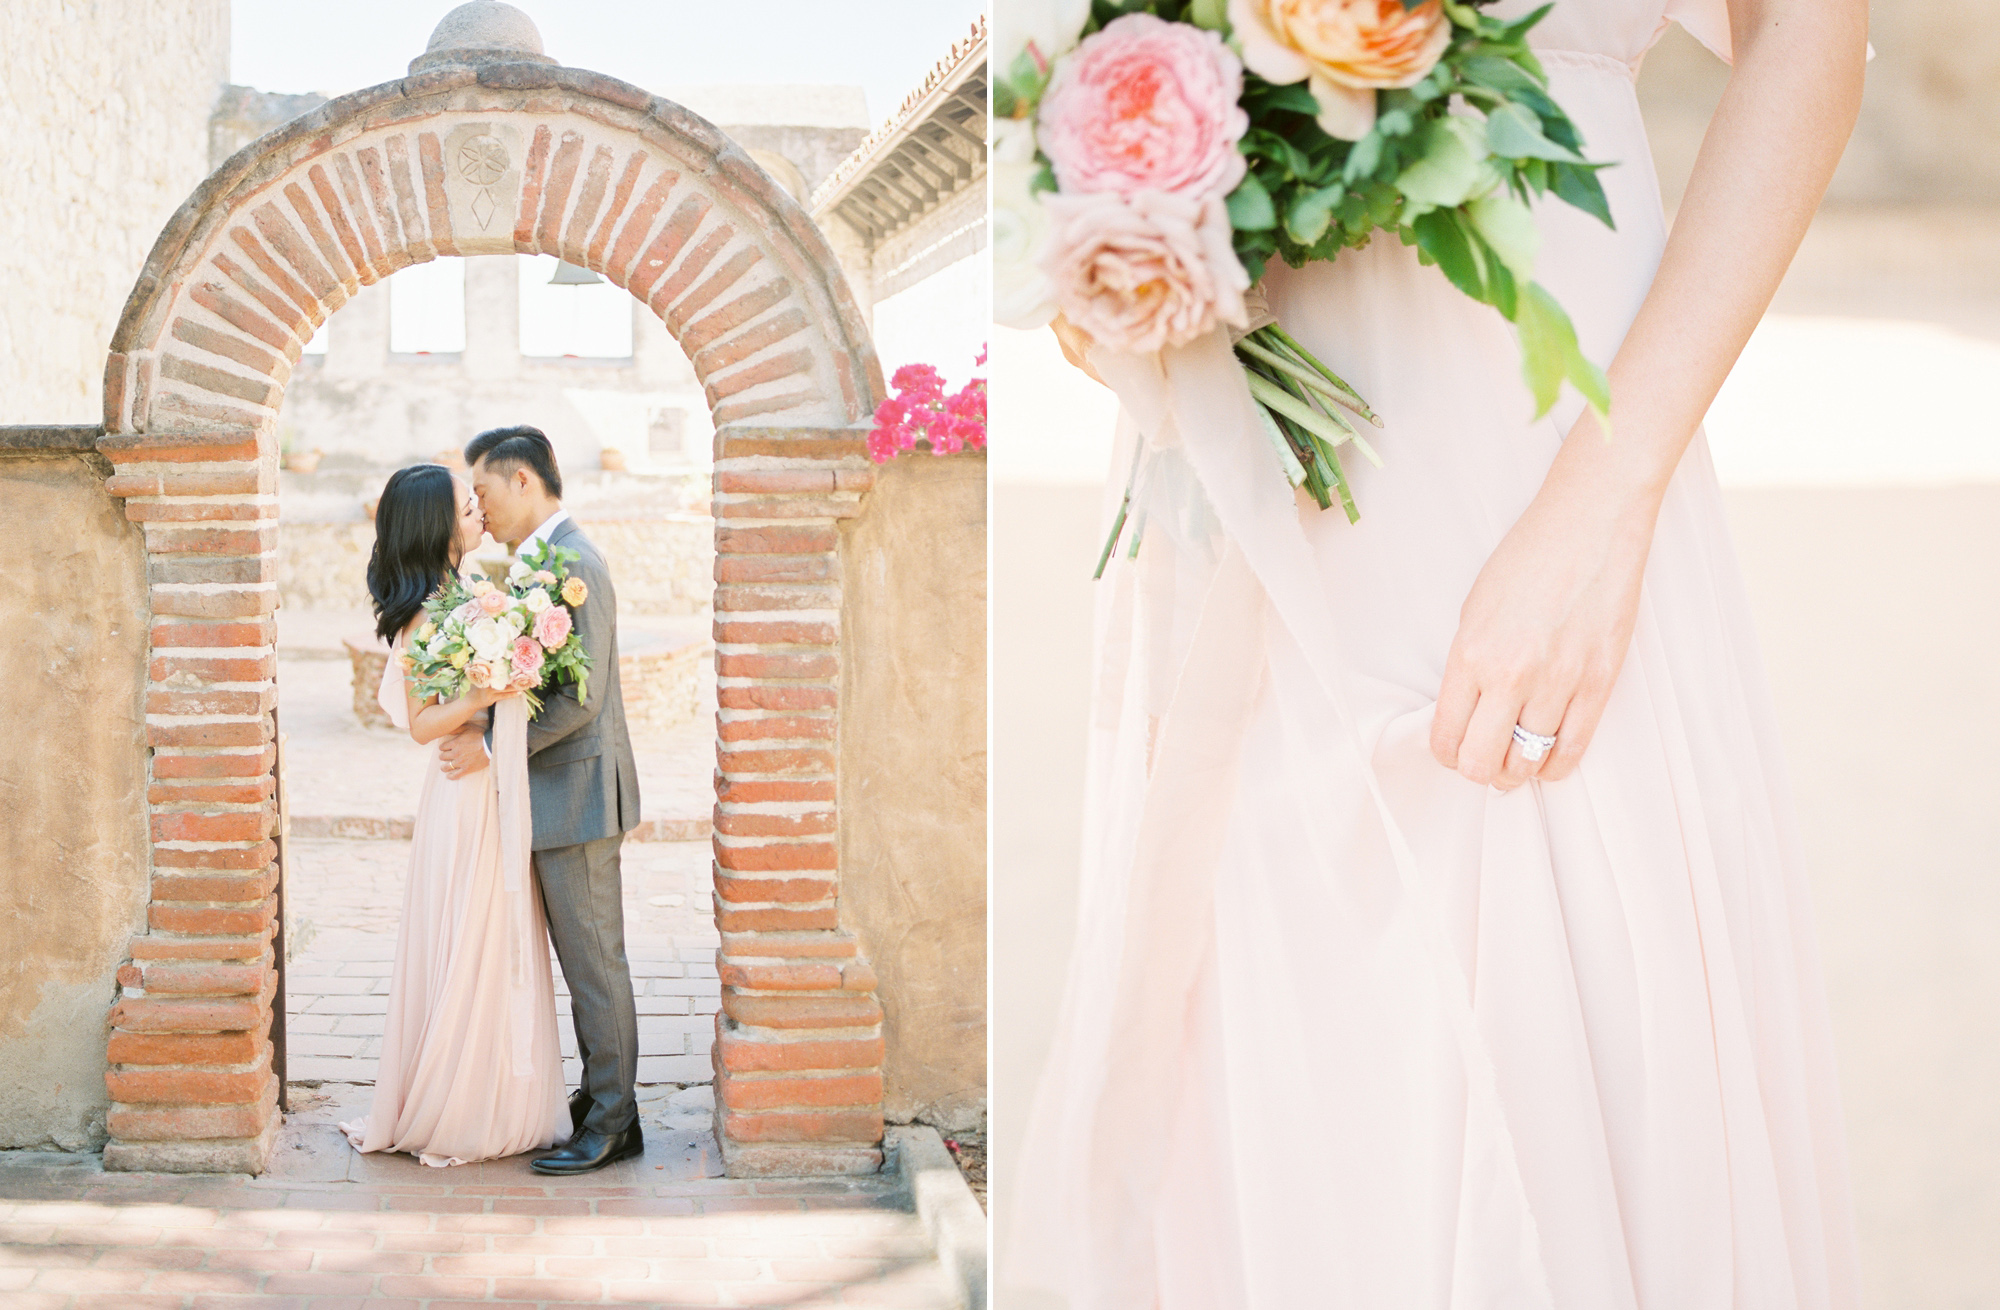 San Juan Capistrano wedding photographer Tenth & Grace specializes in timeless fine art images for discerning couples.